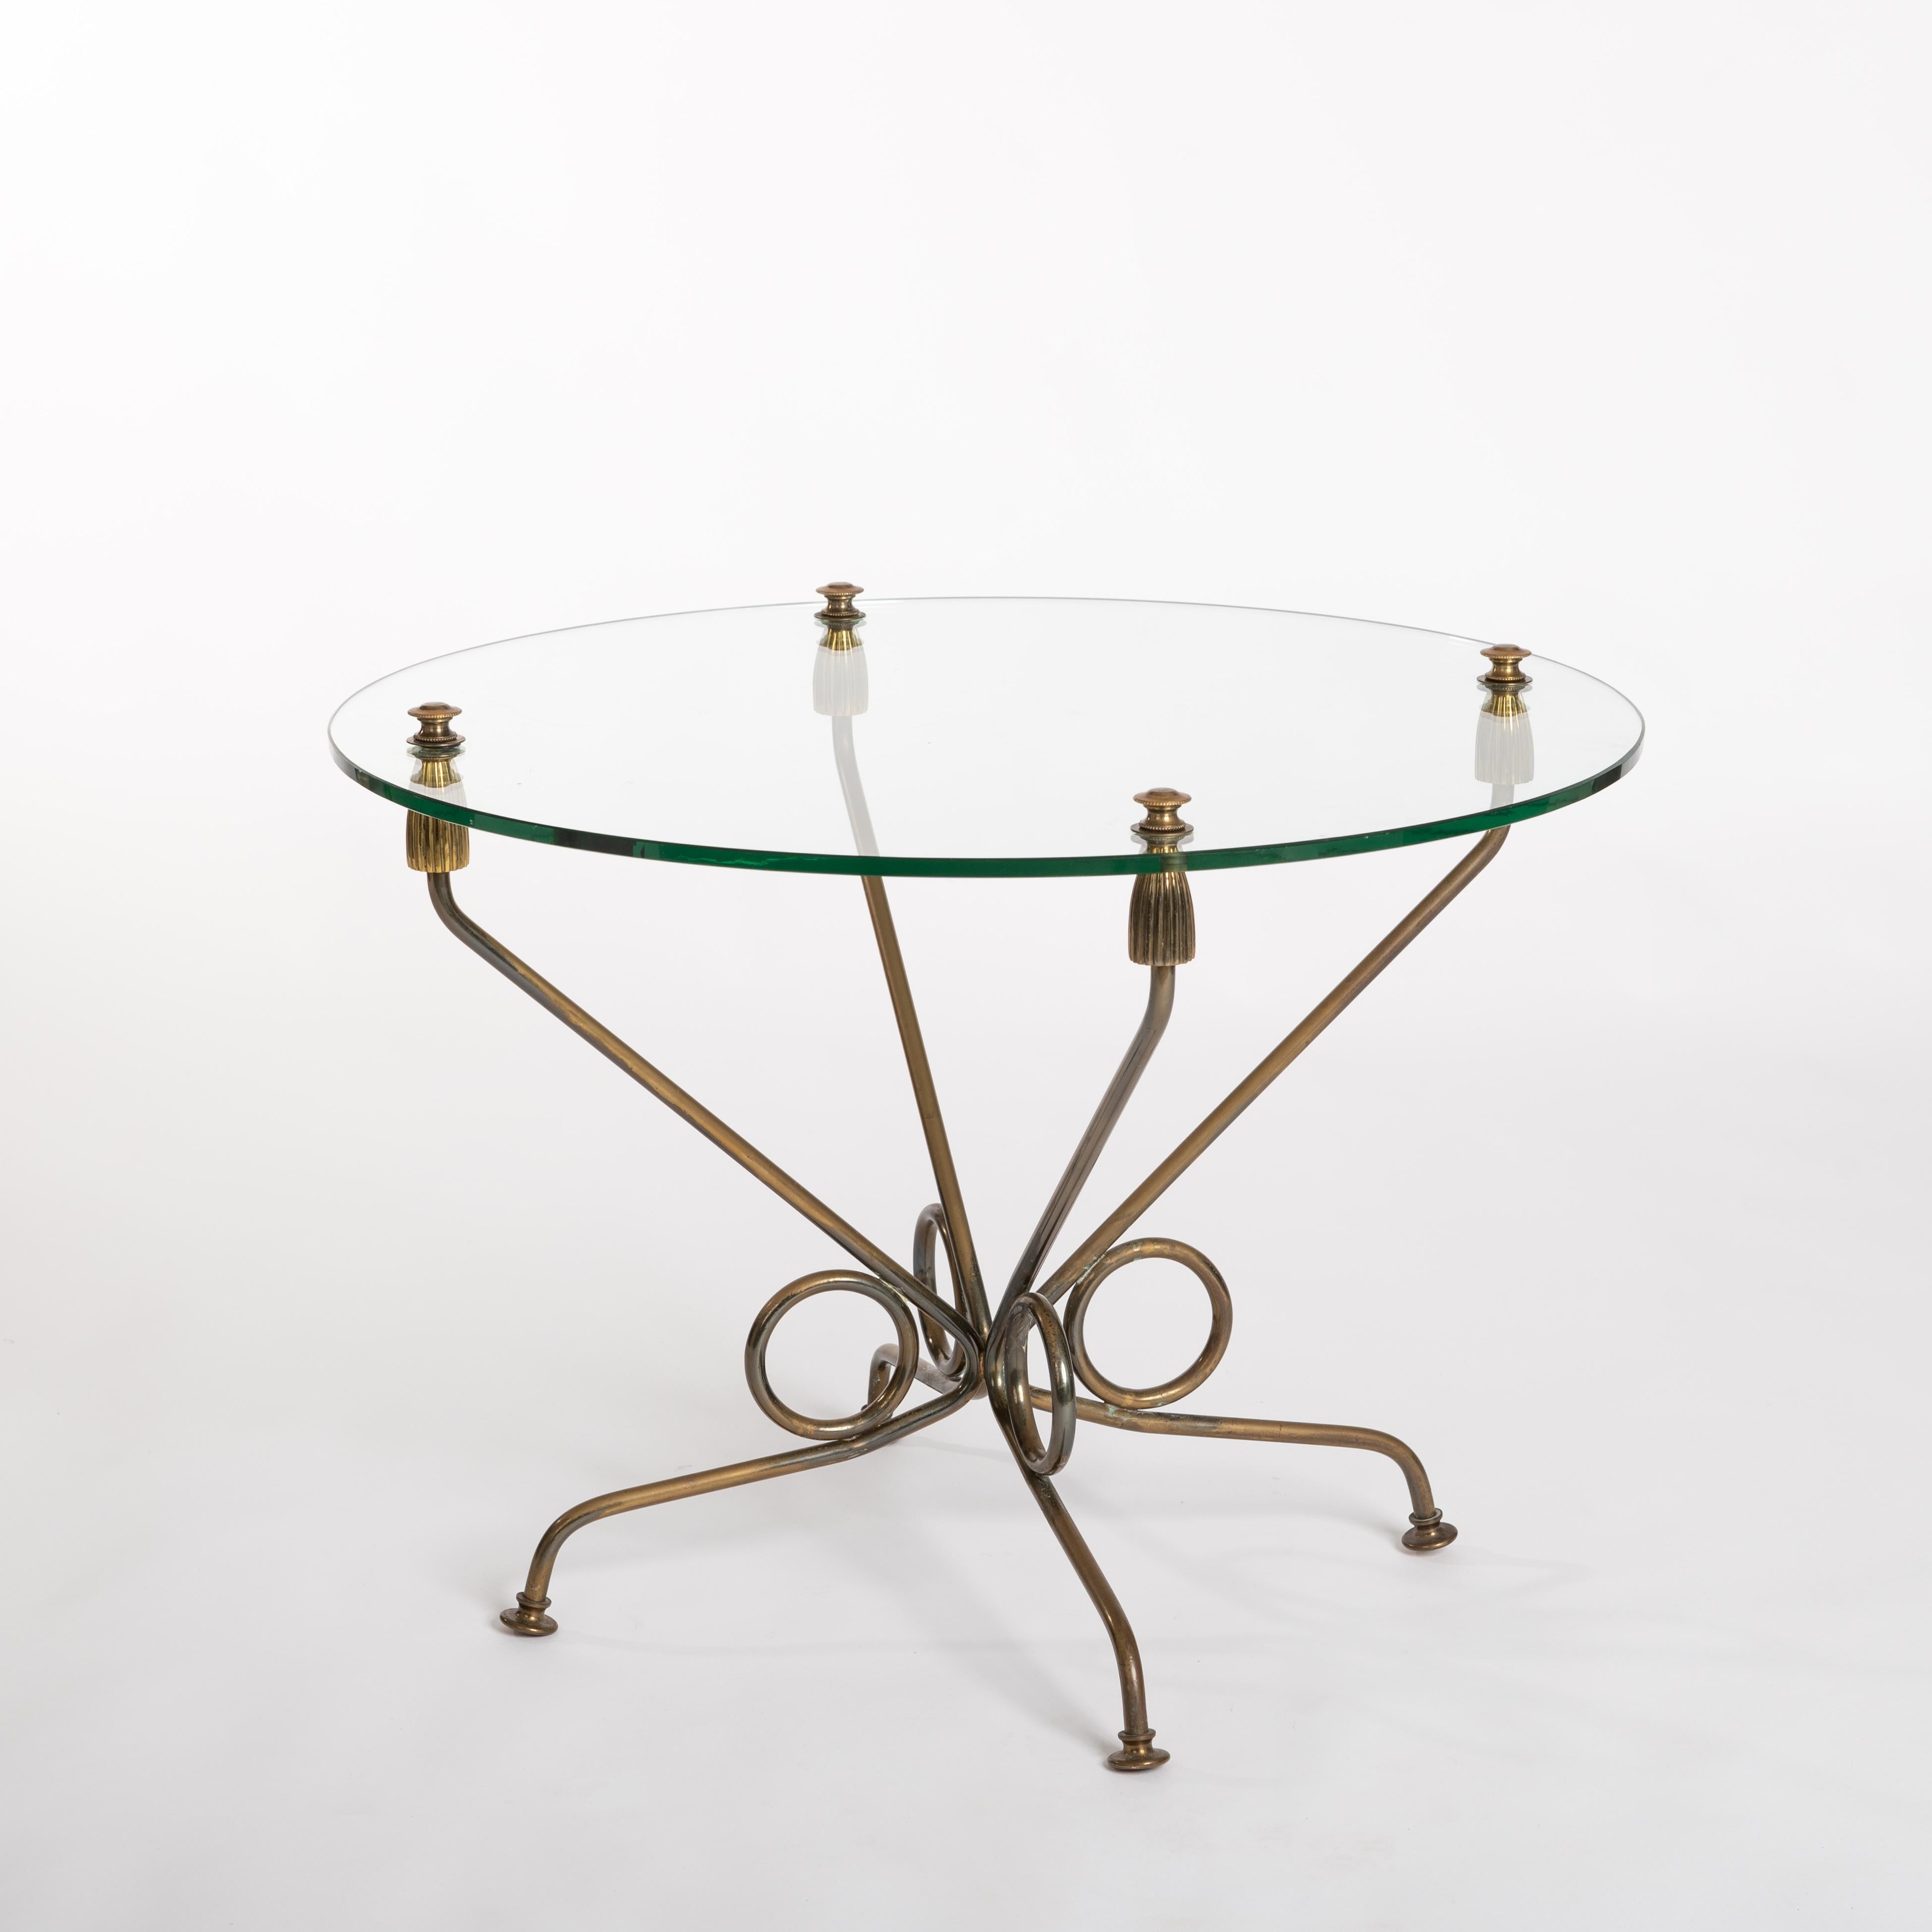 Mid-20th Century Italian Mid-Century Coffeetable Brass Plated Iron Base and Glass Top, 1950s For Sale